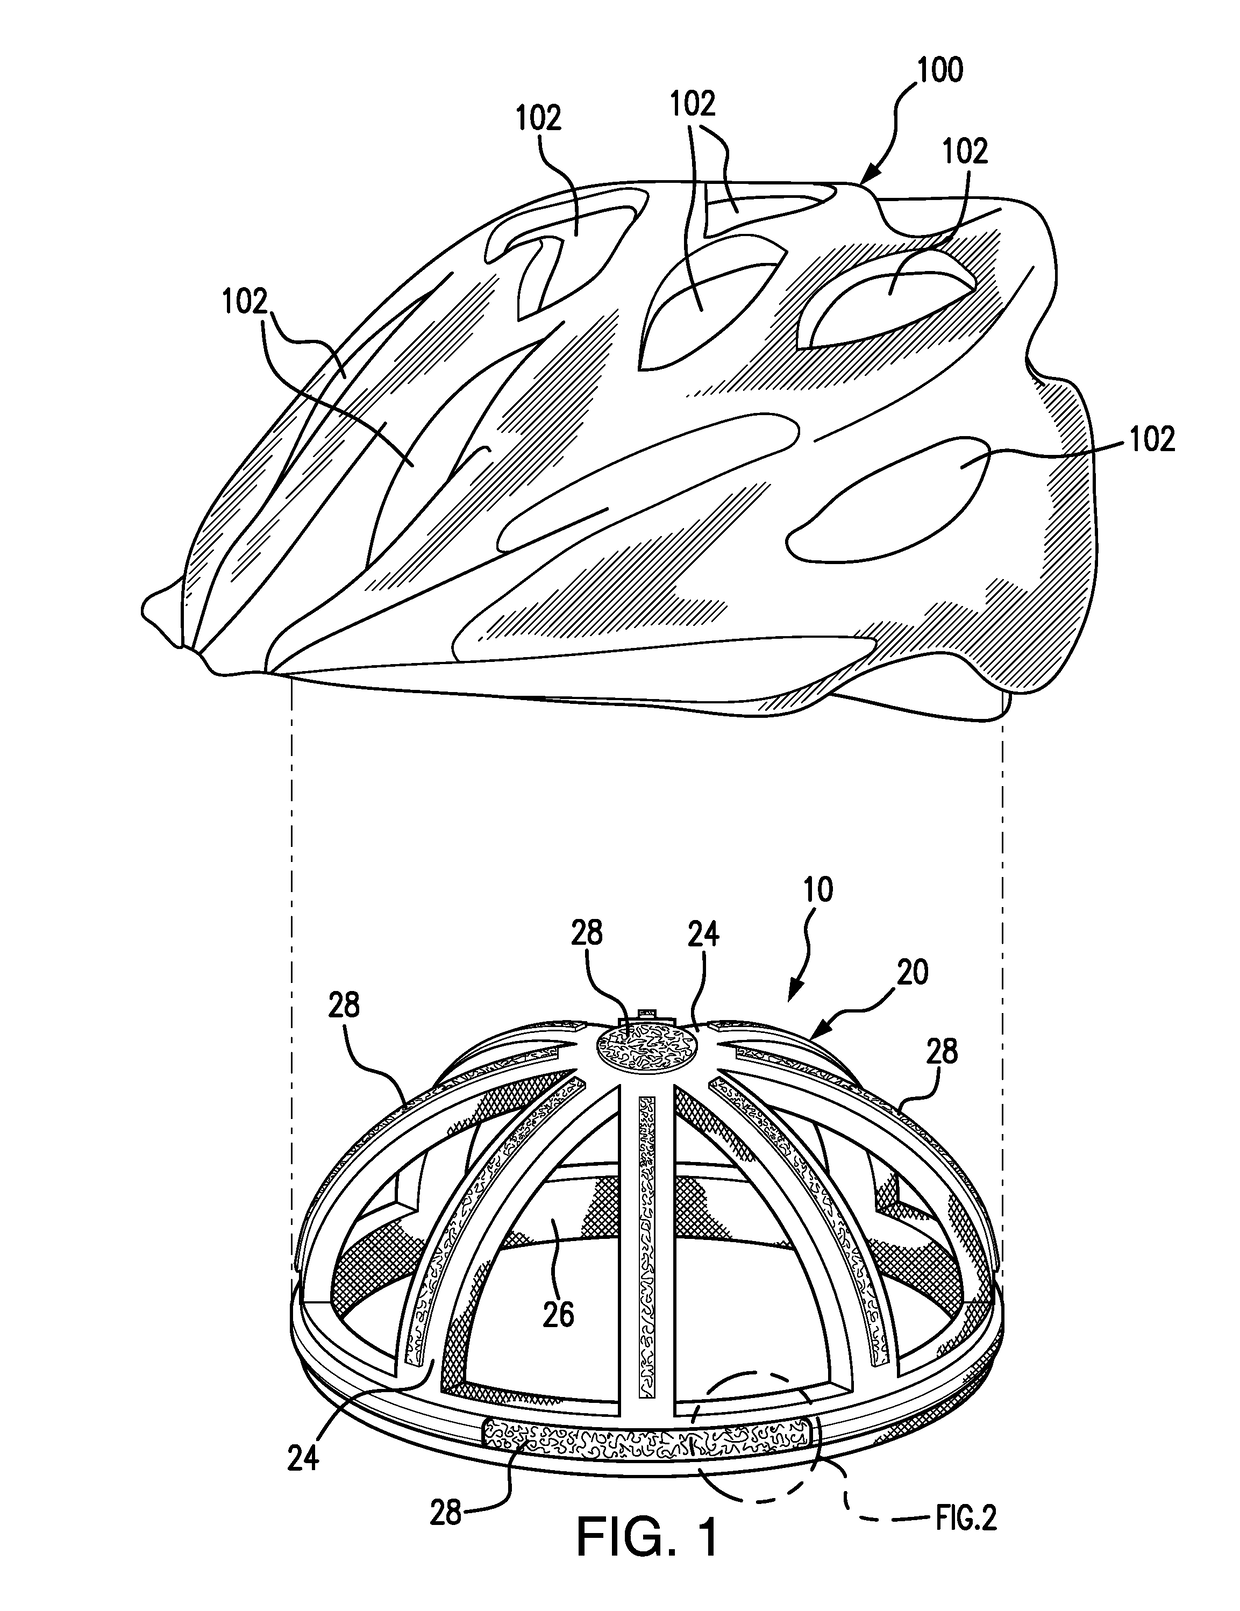 Head protective insert technology for significantly reducing subconcussive level impacts to protective headgear used in contact and collision sports